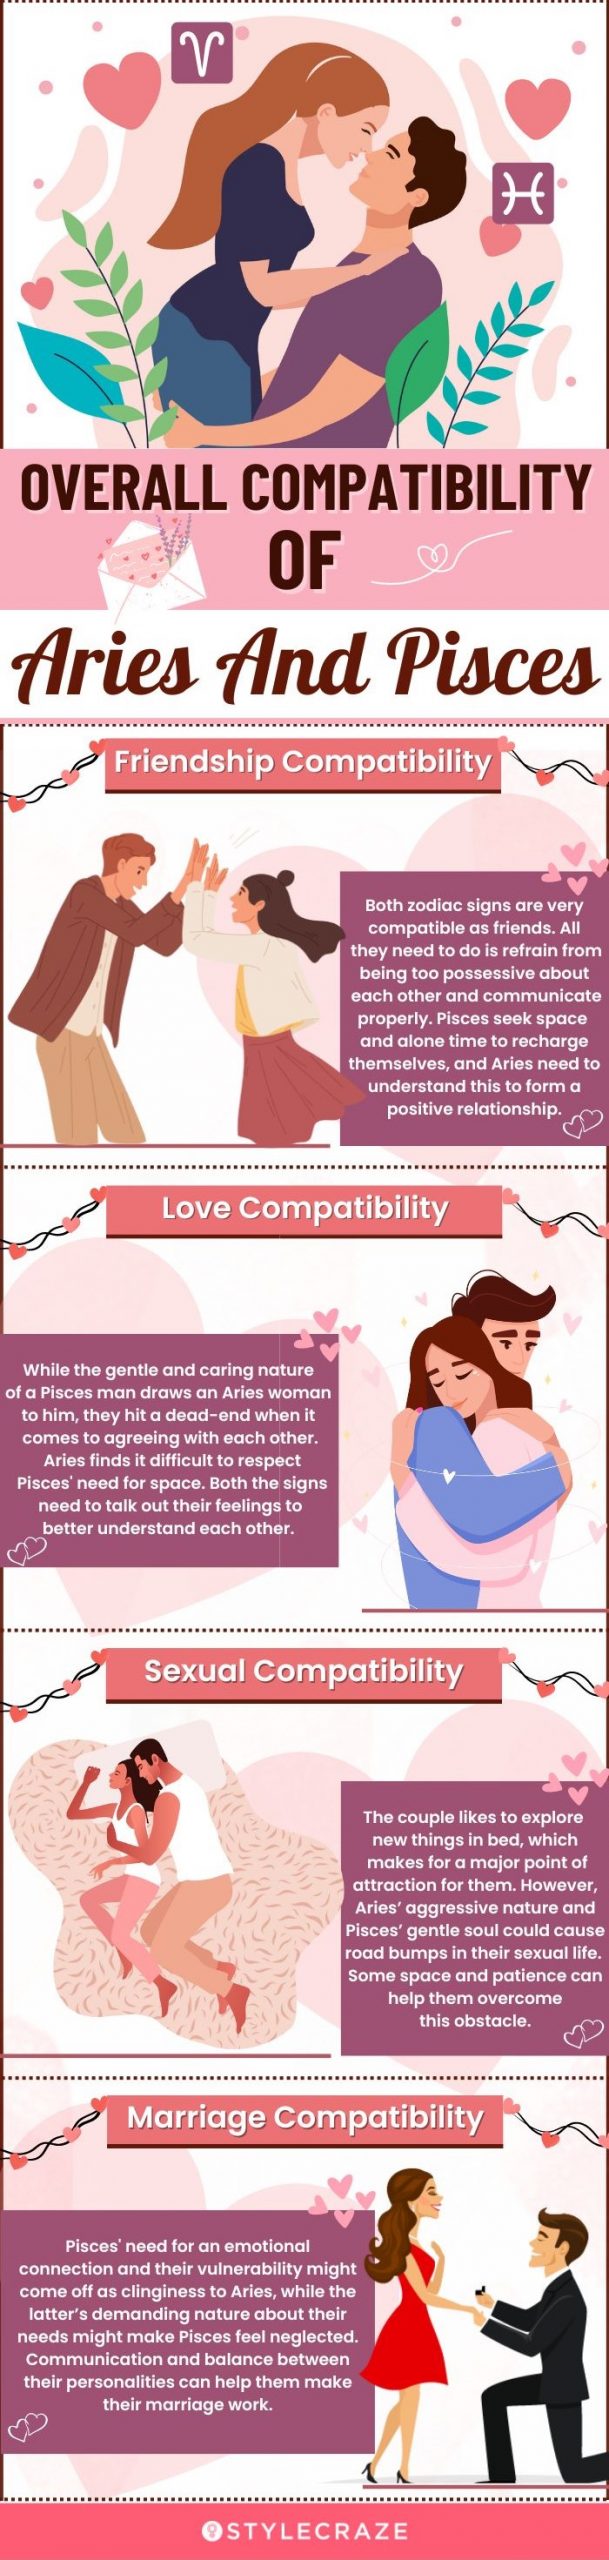 overall compatibility of aries and pisces (infographic)